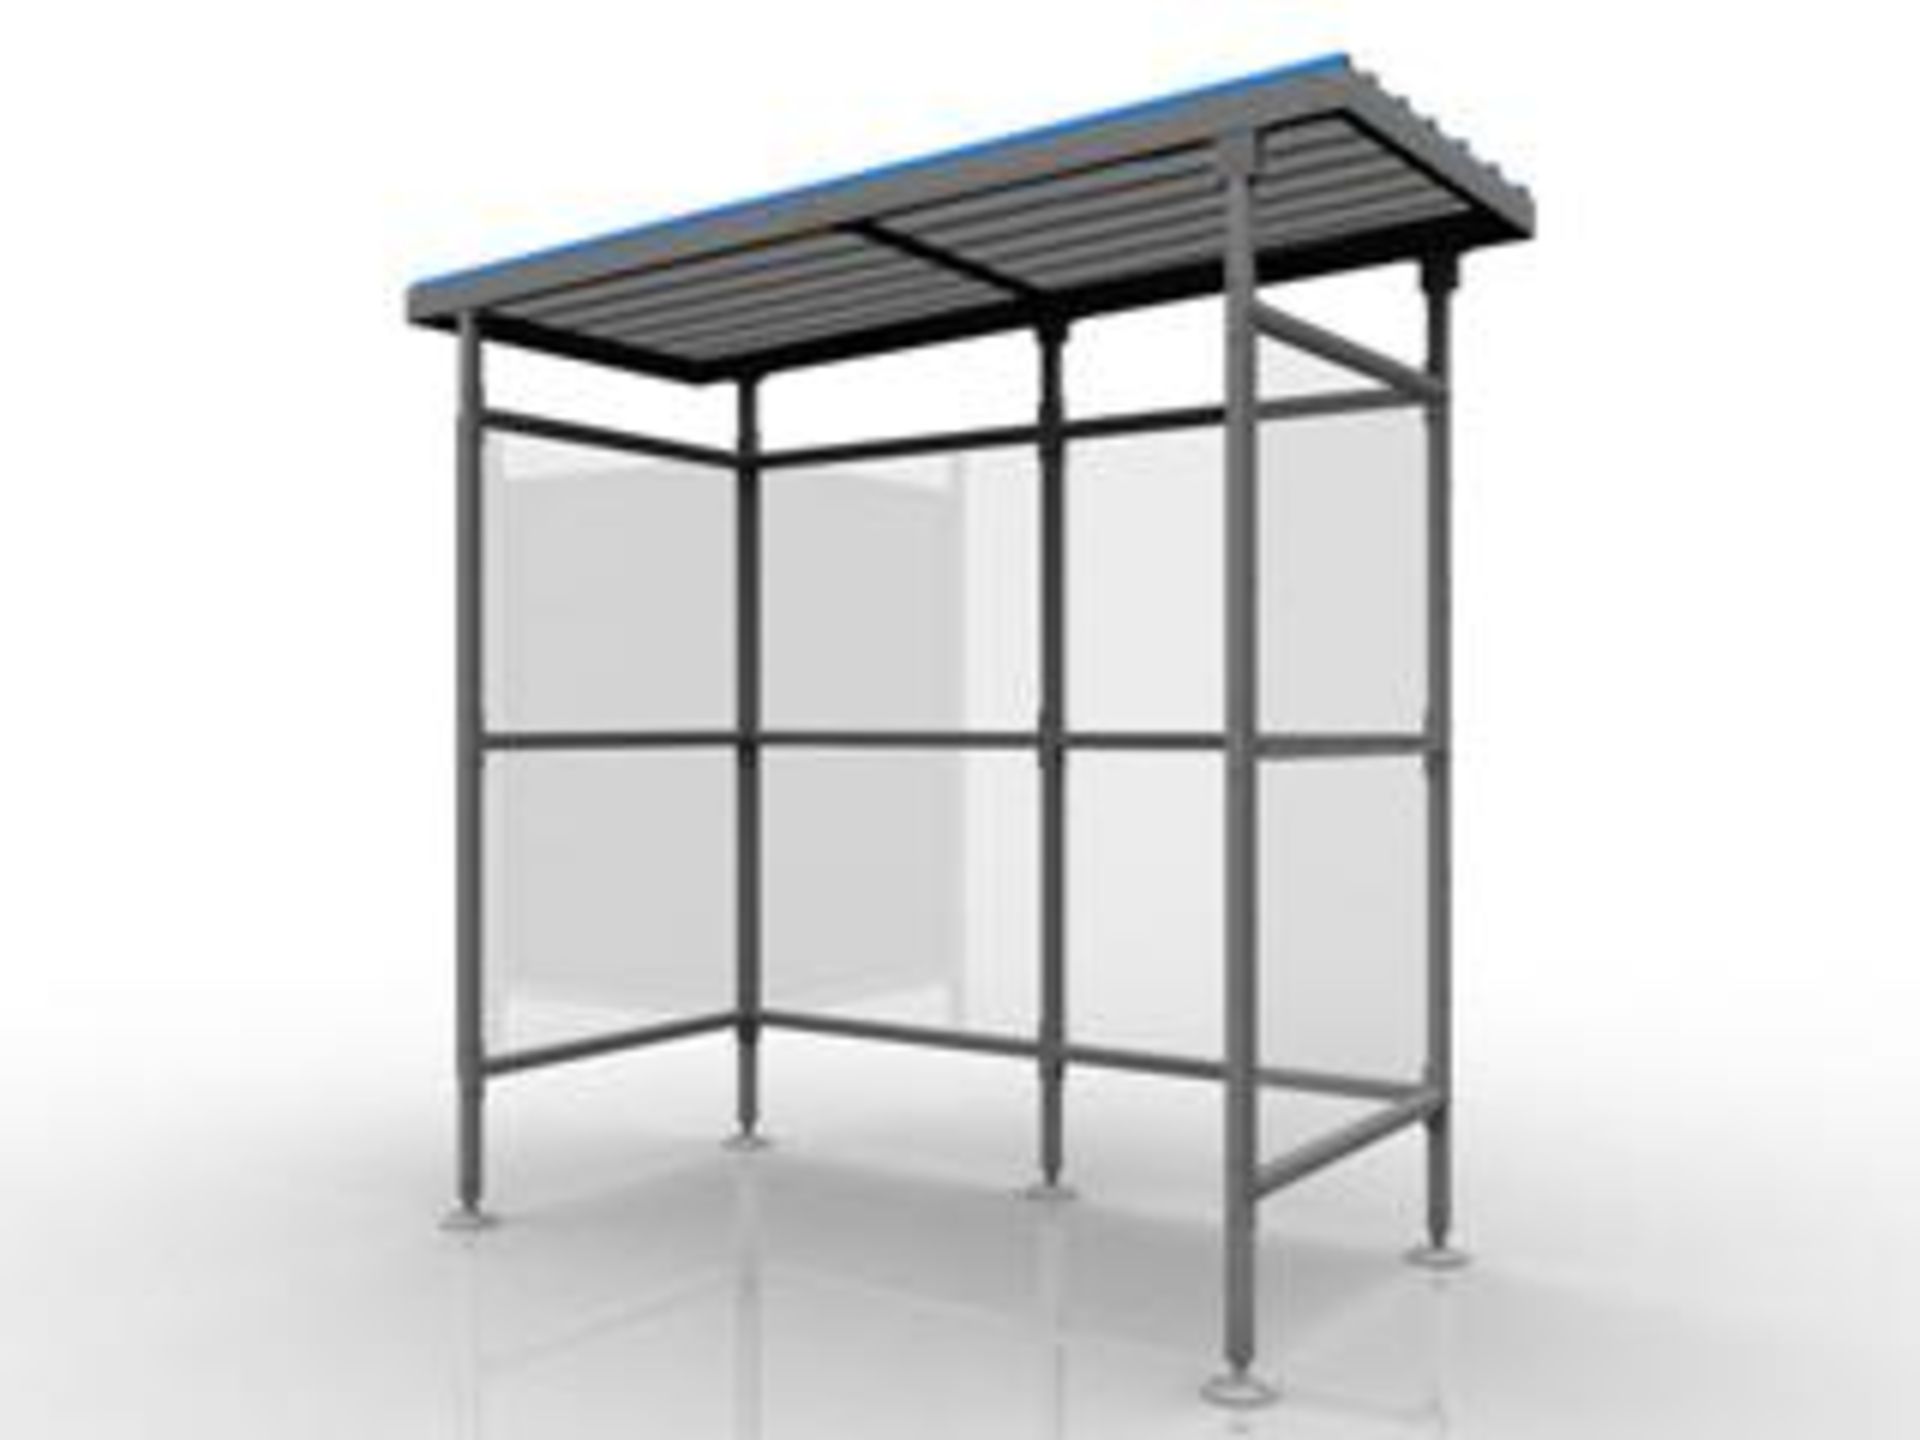 * 1 x 4/5 Person smoking shelter (1m x 2m), palletised and shrink wrapped (pallet weight approx 0.